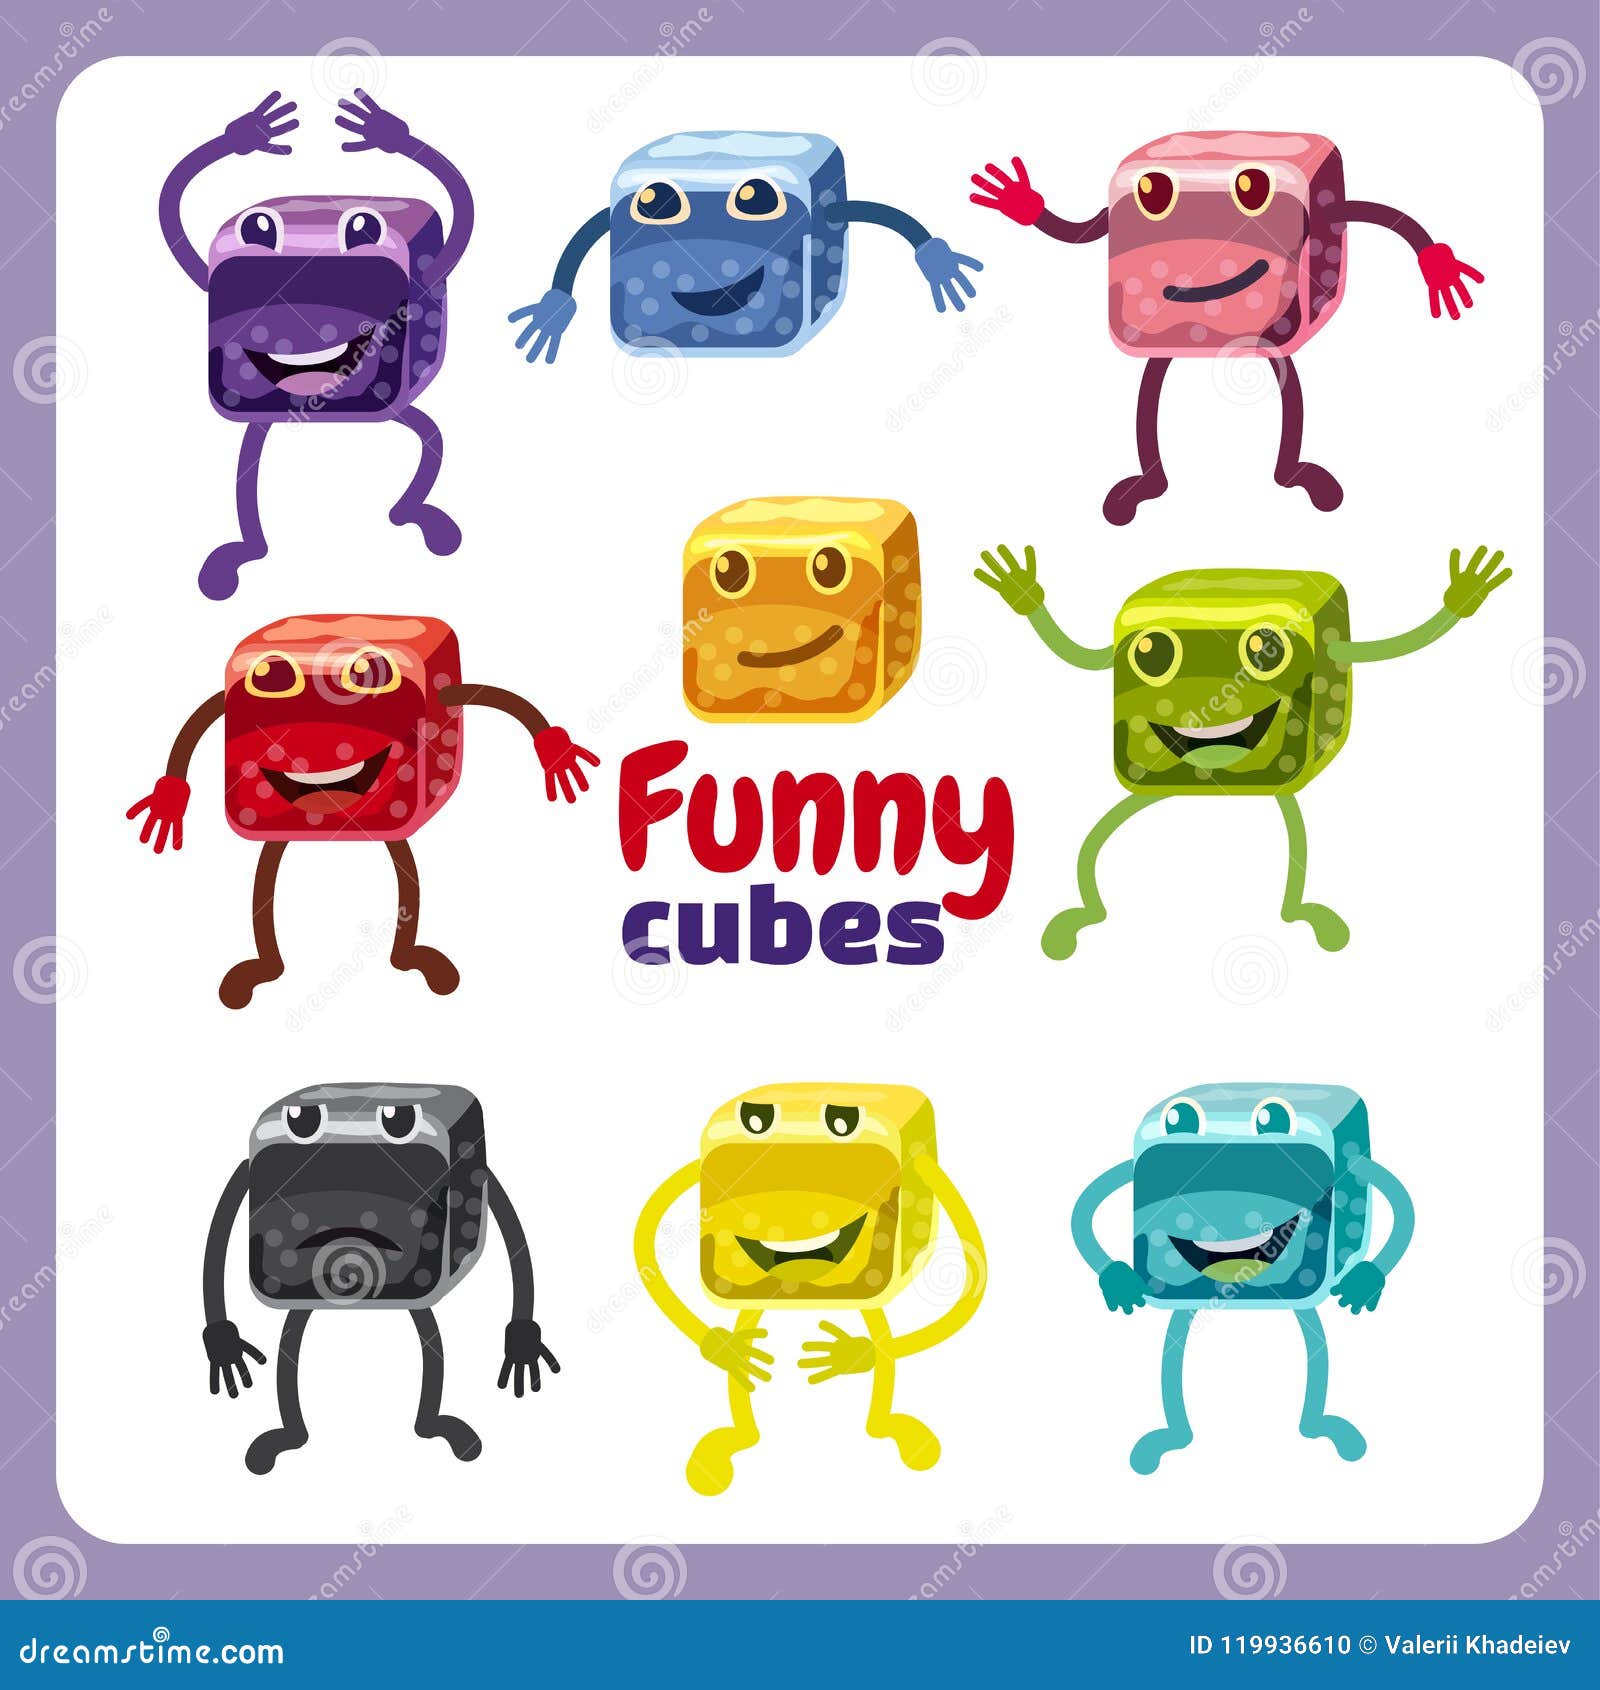 Funny Cute Cubes Colorful Candy Button Glossy Jelly in Different Color. 2d  Asset for User Interface GUI in Mobile Stock Vector - Illustration of  cartoon, collection: 119936610